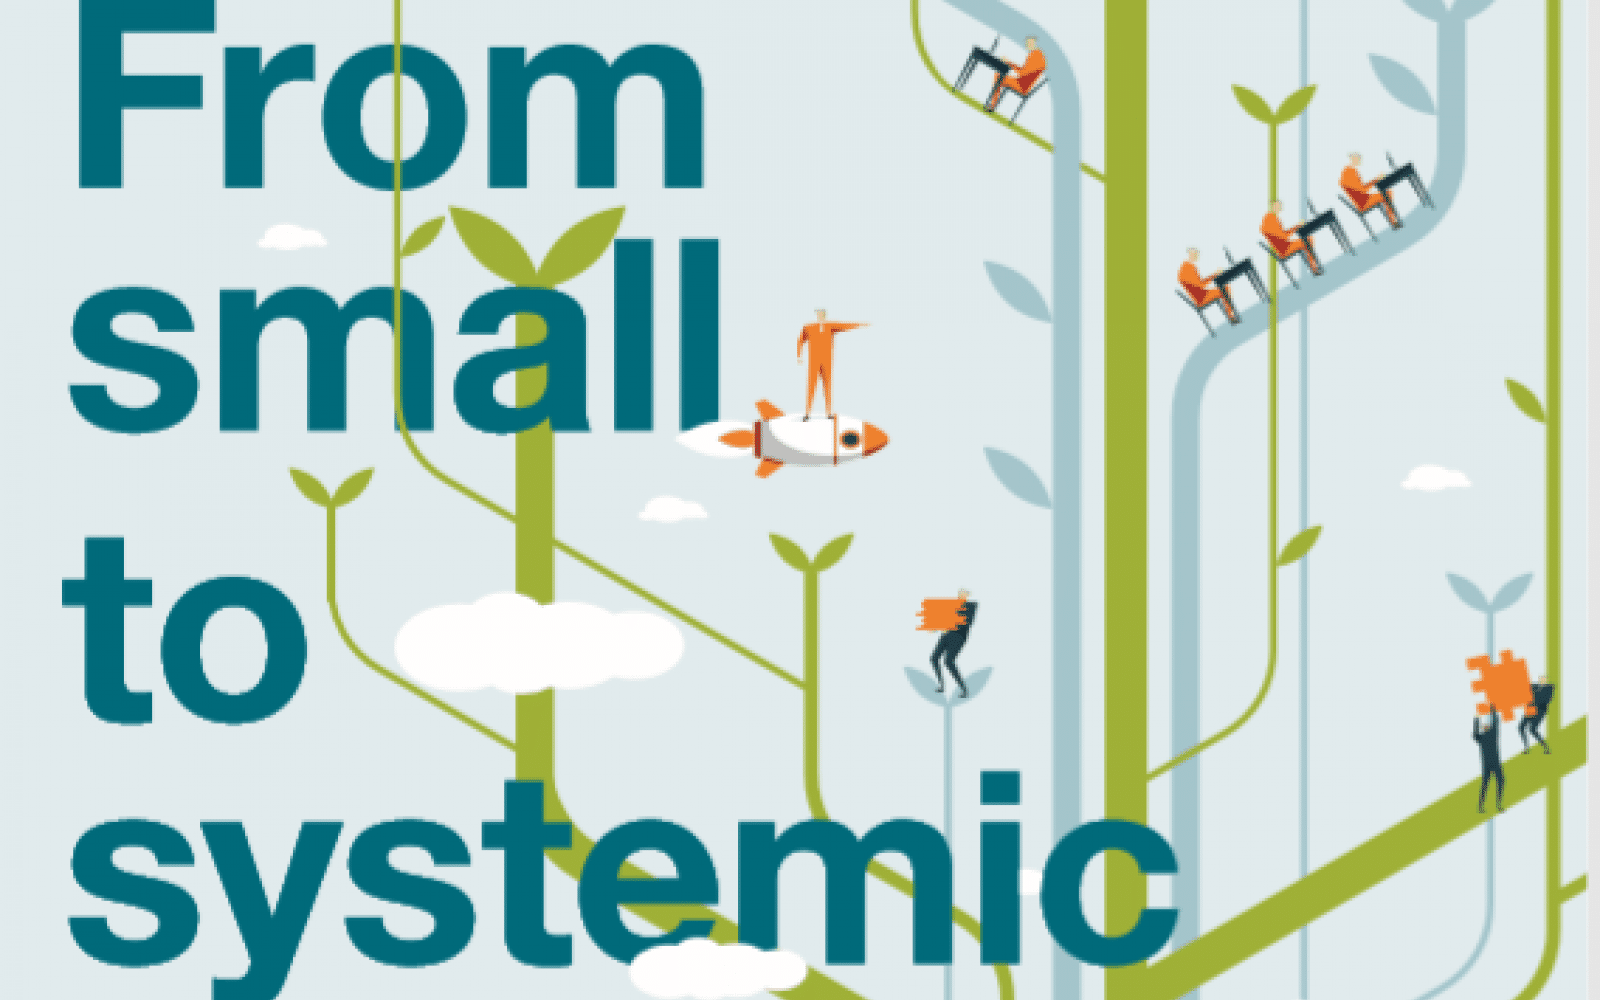 From Small to Systemic